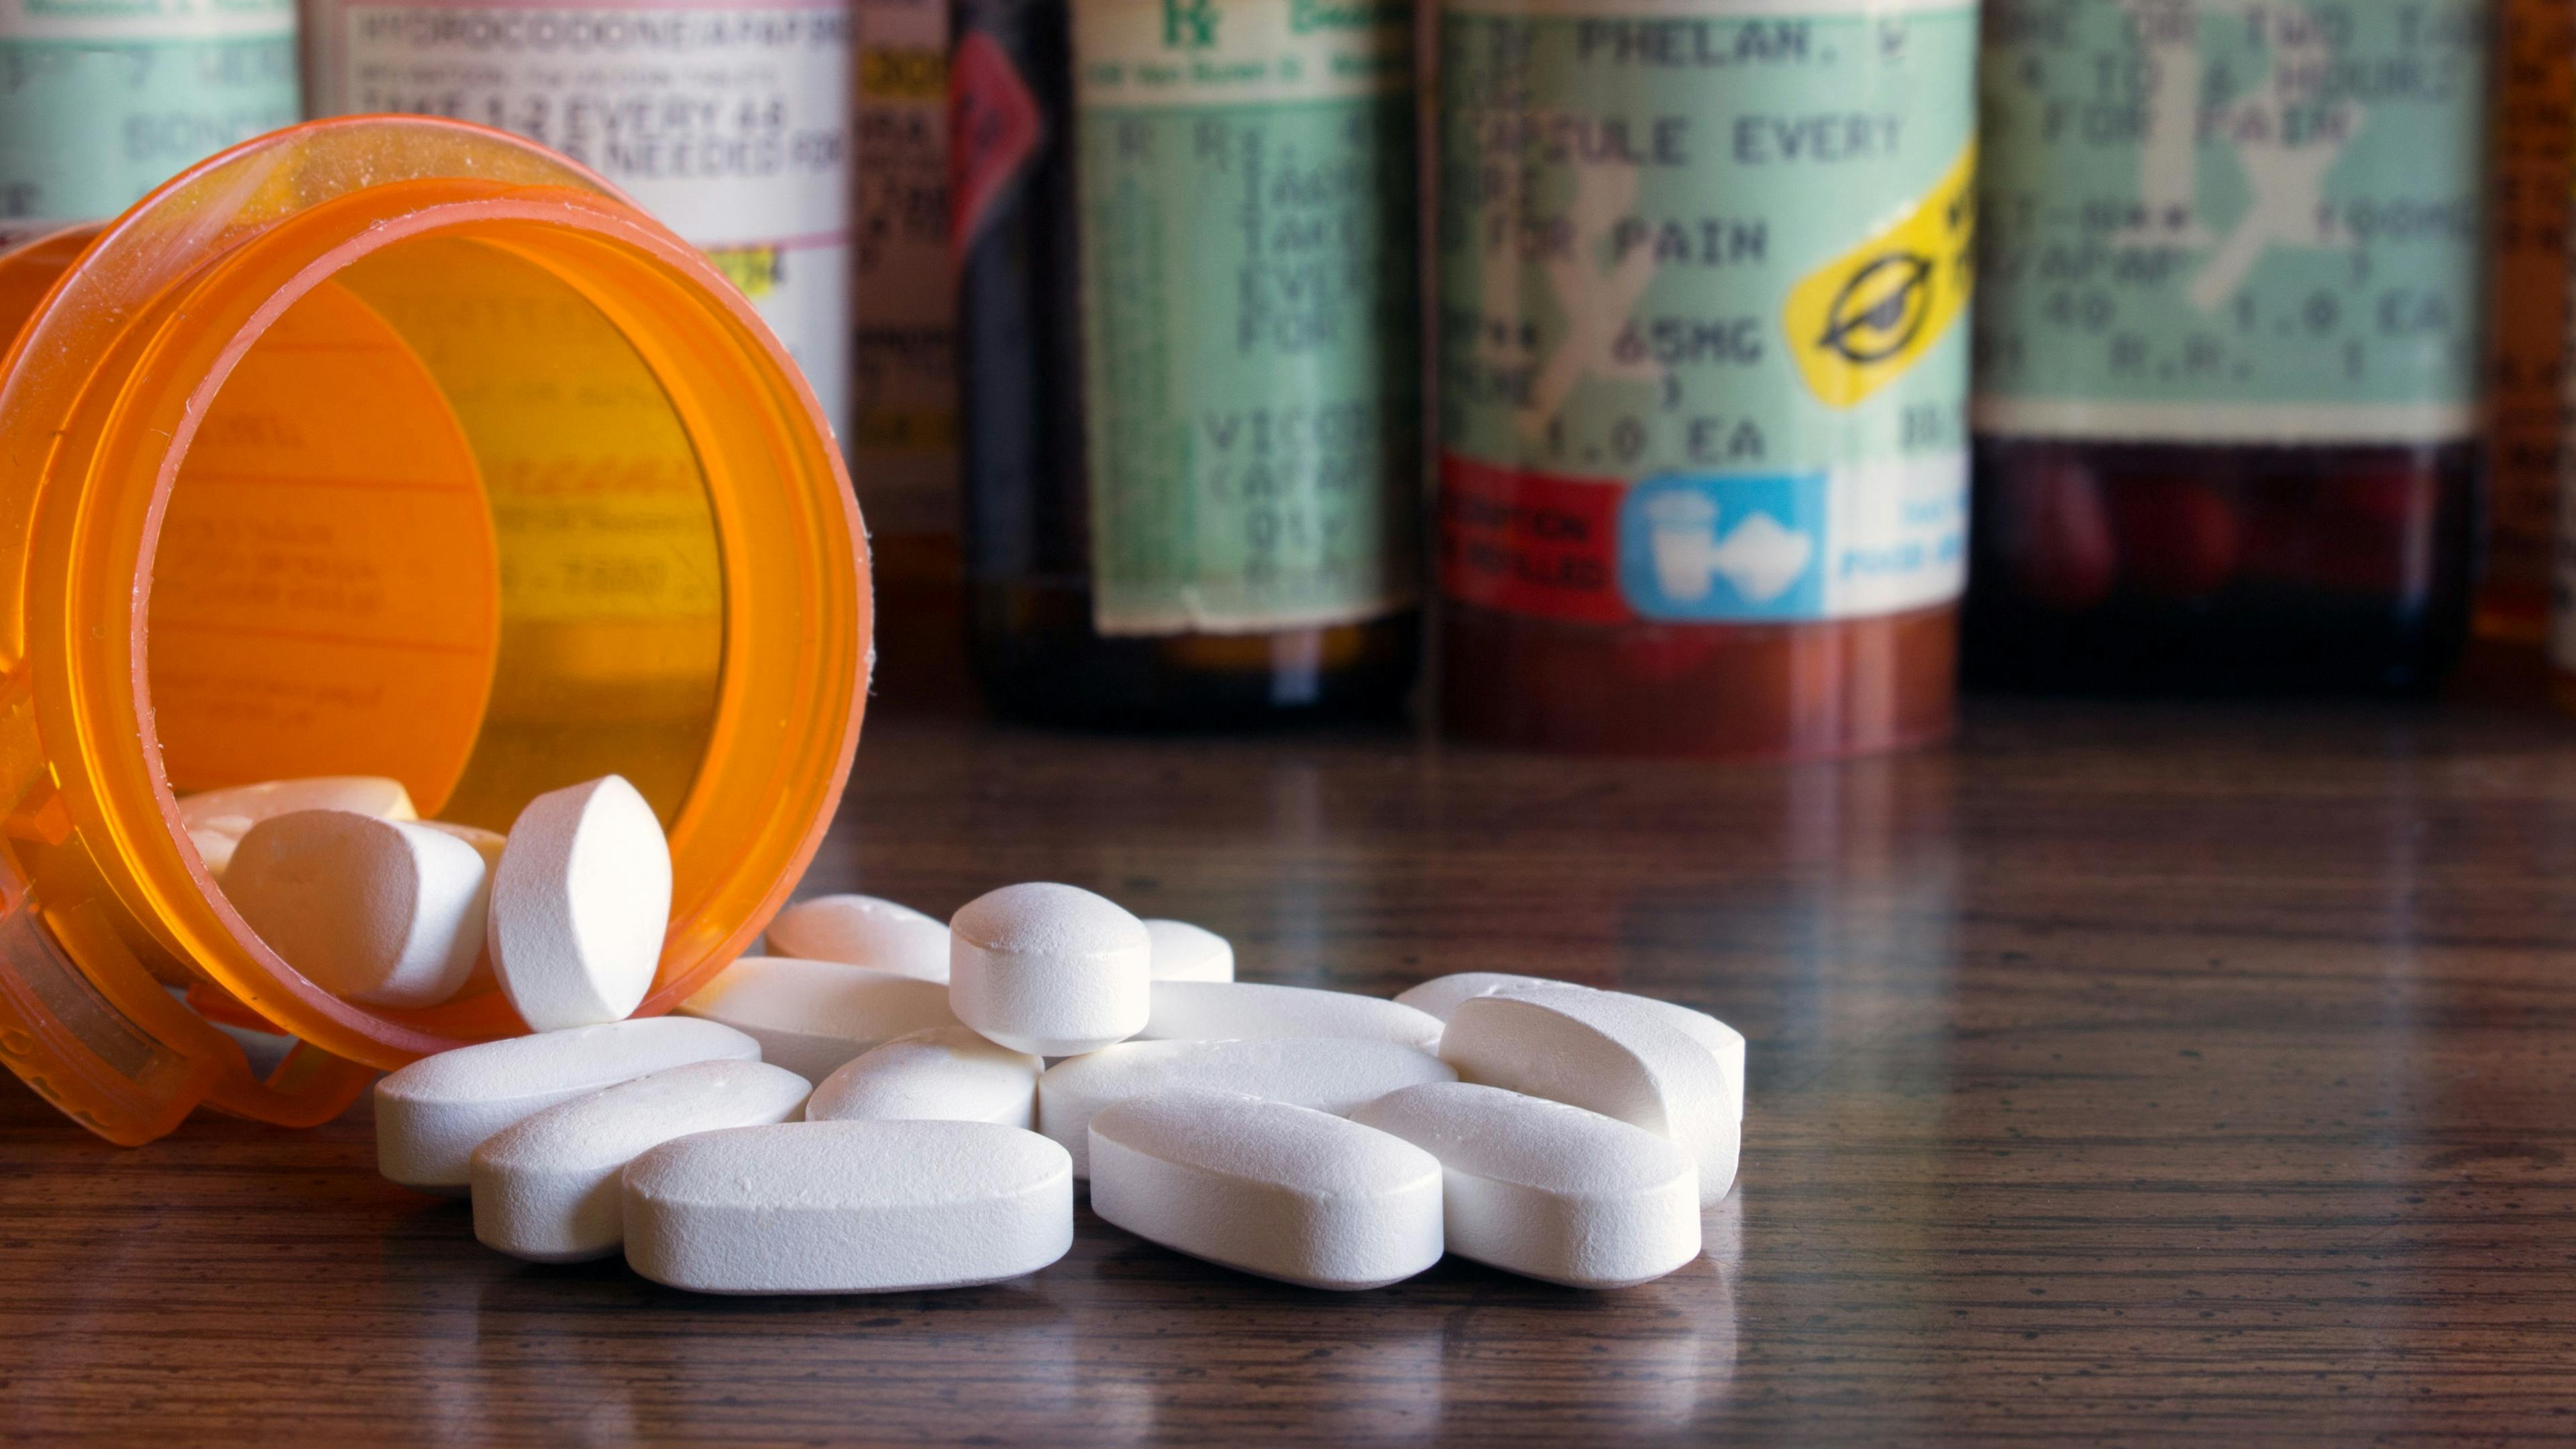 Prescription opioids with many bottles of pills in the background. Concepts of addiction, opioid crisis, overdose and doctor shopping | Image Credit: Kimberly Boyles - stock.adobe.com